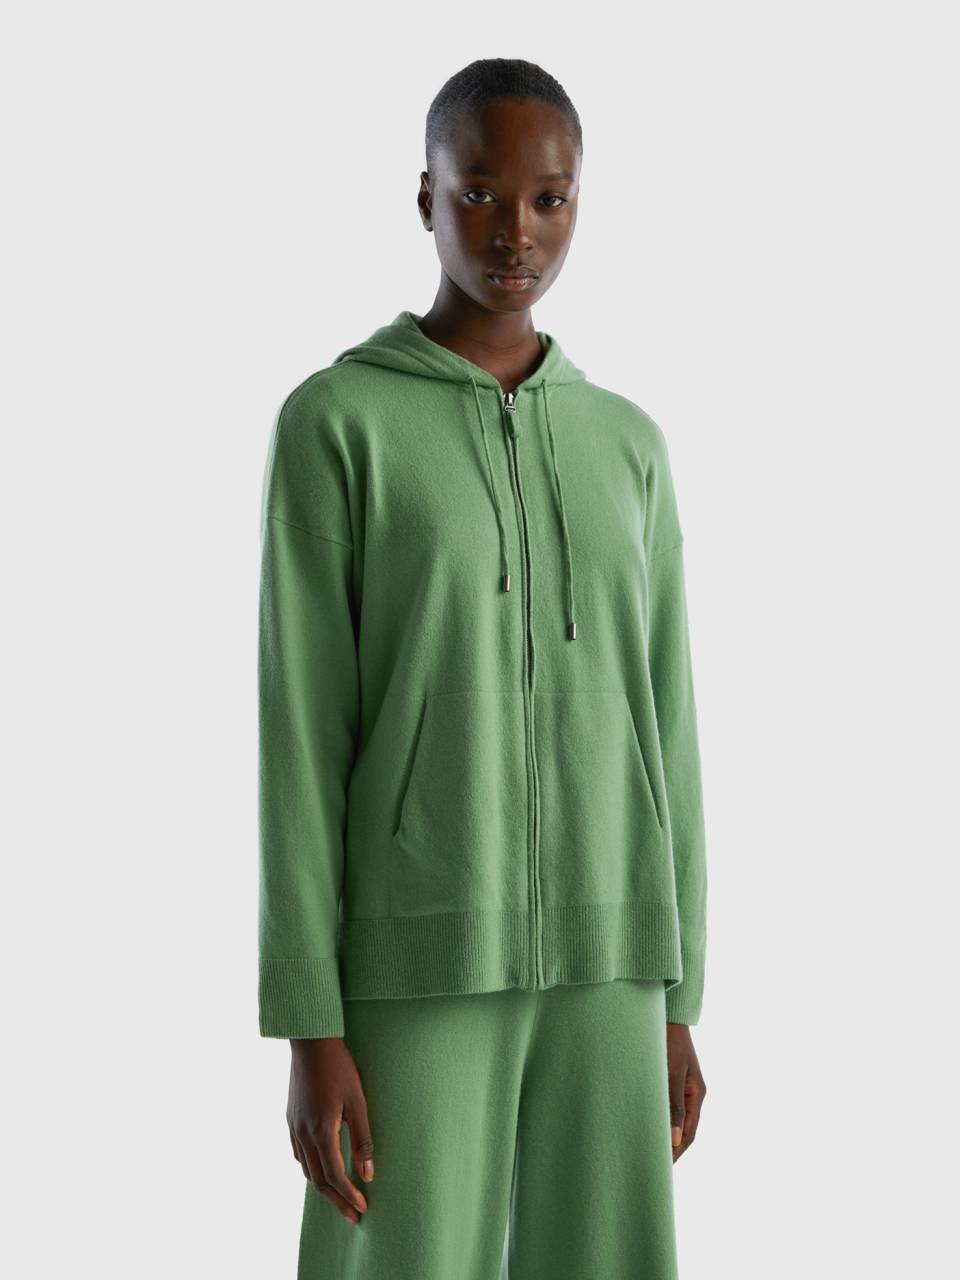 Benetton Sage green sweater in cashmere blend with hood. 1